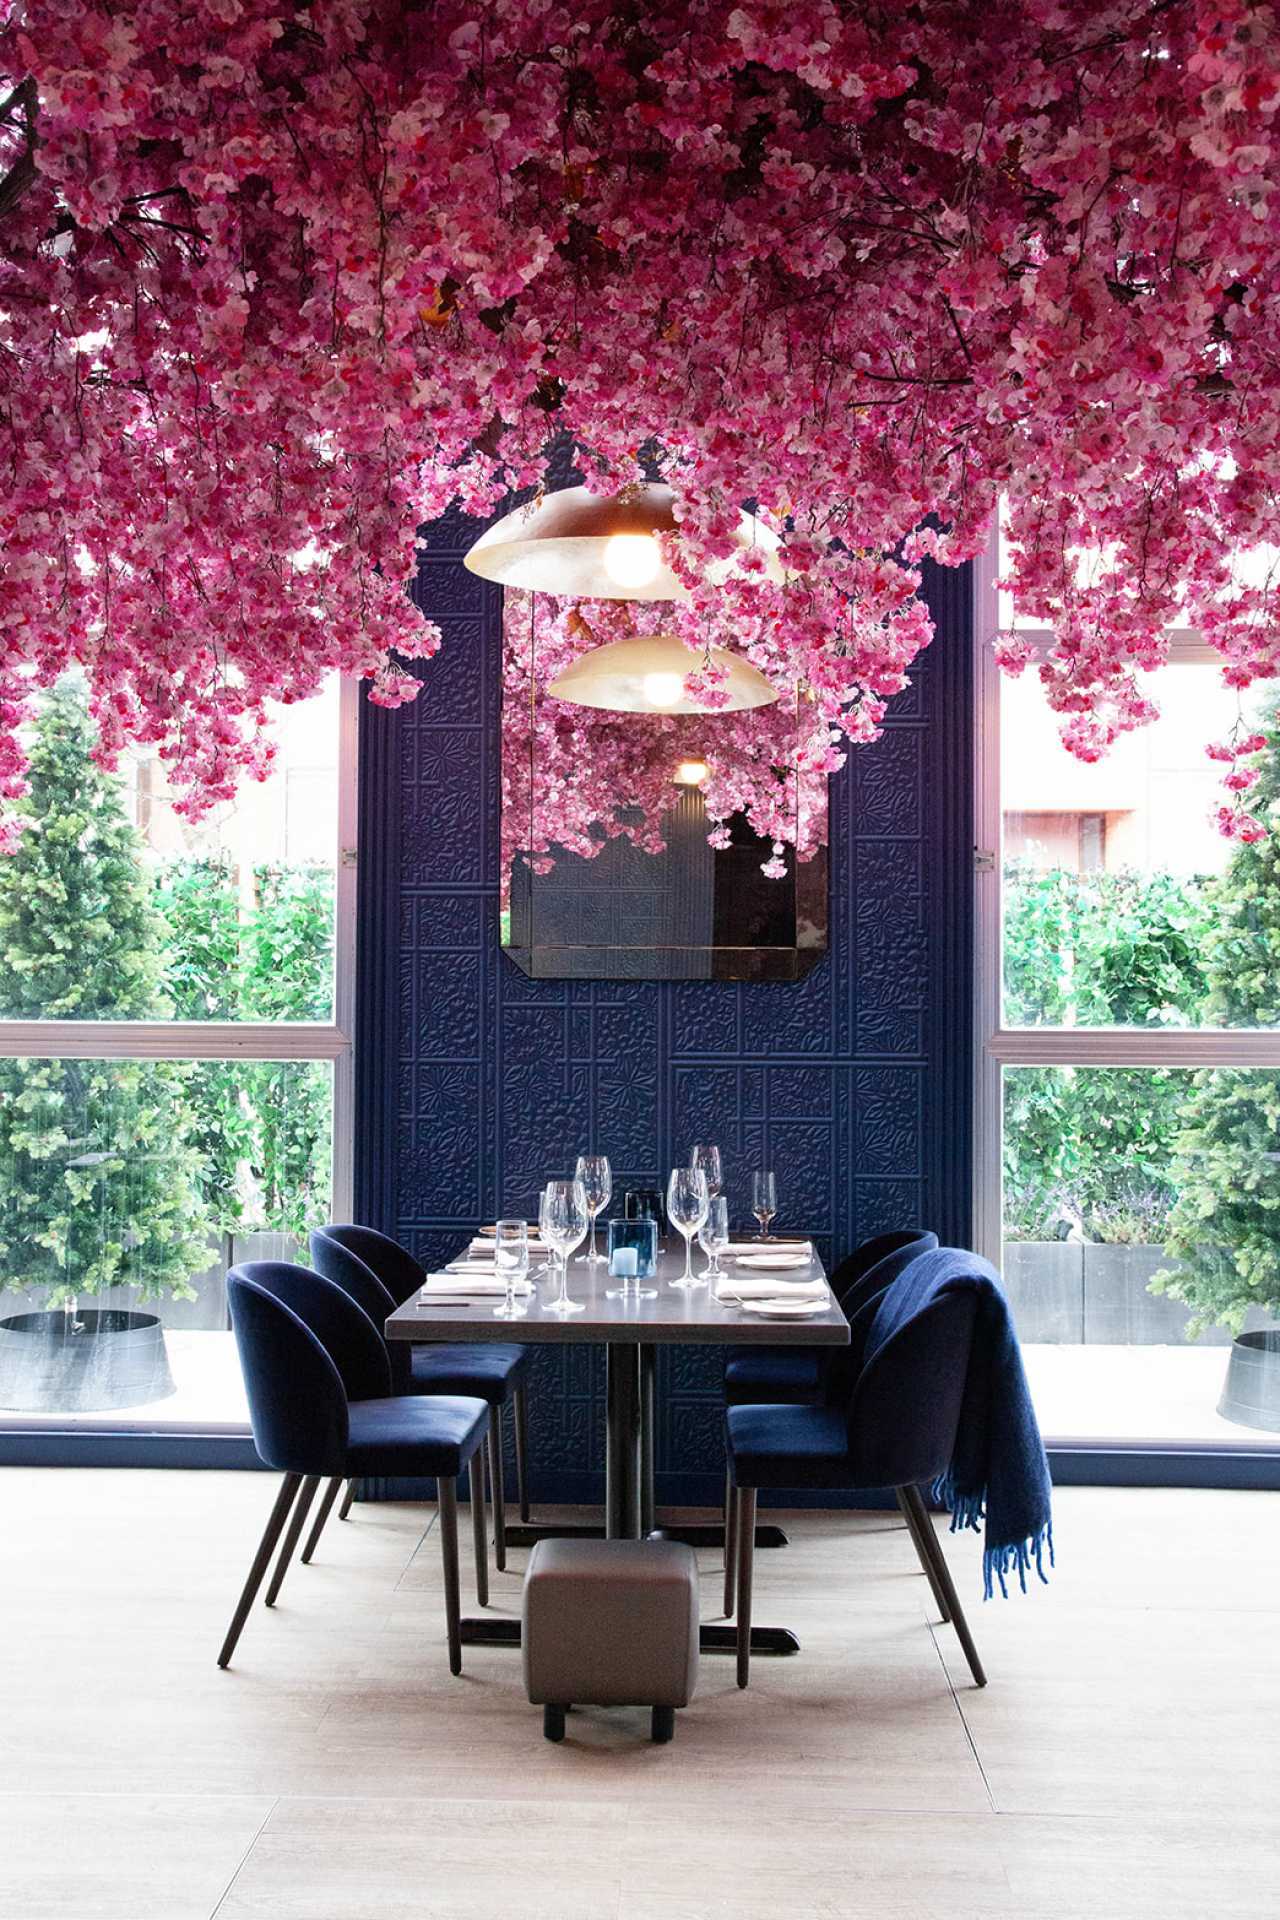 Via Allegro Ristorante | A table under pink flowers inside the glass-enclosed heated patio